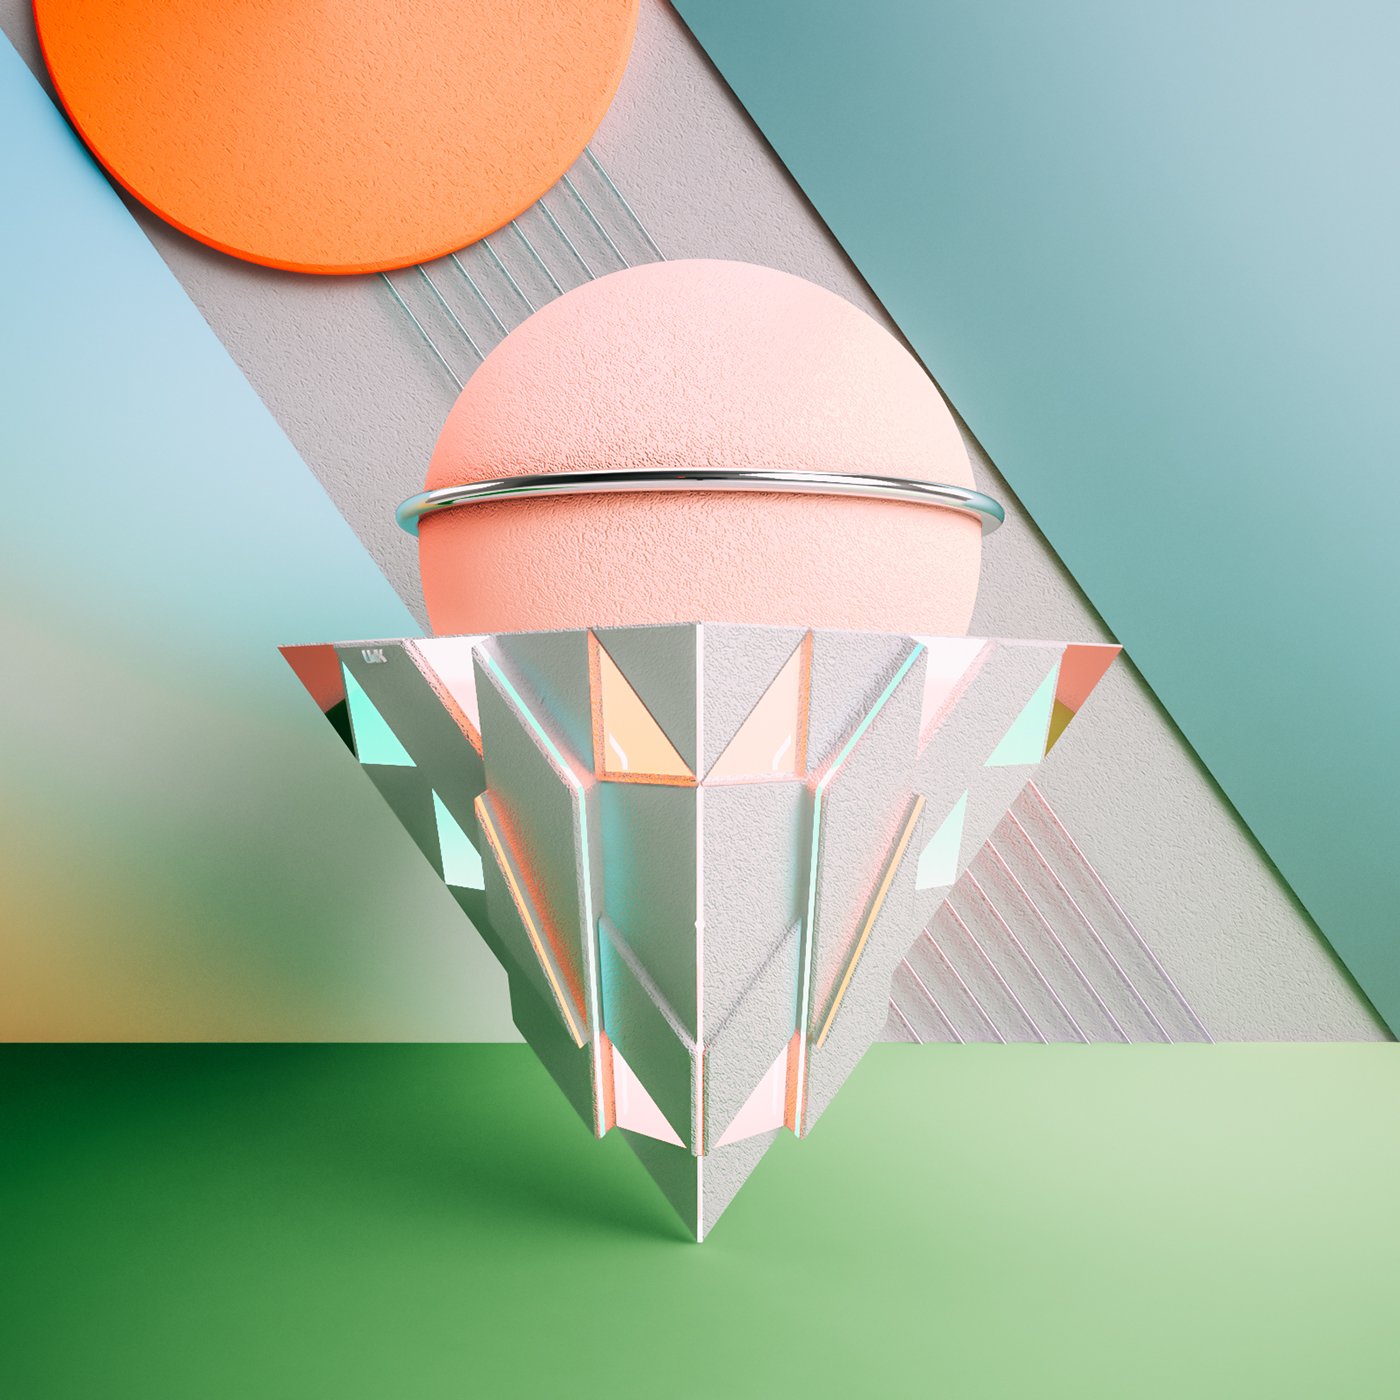 Aesthetic Colorful & Geometric 3D Structures-1